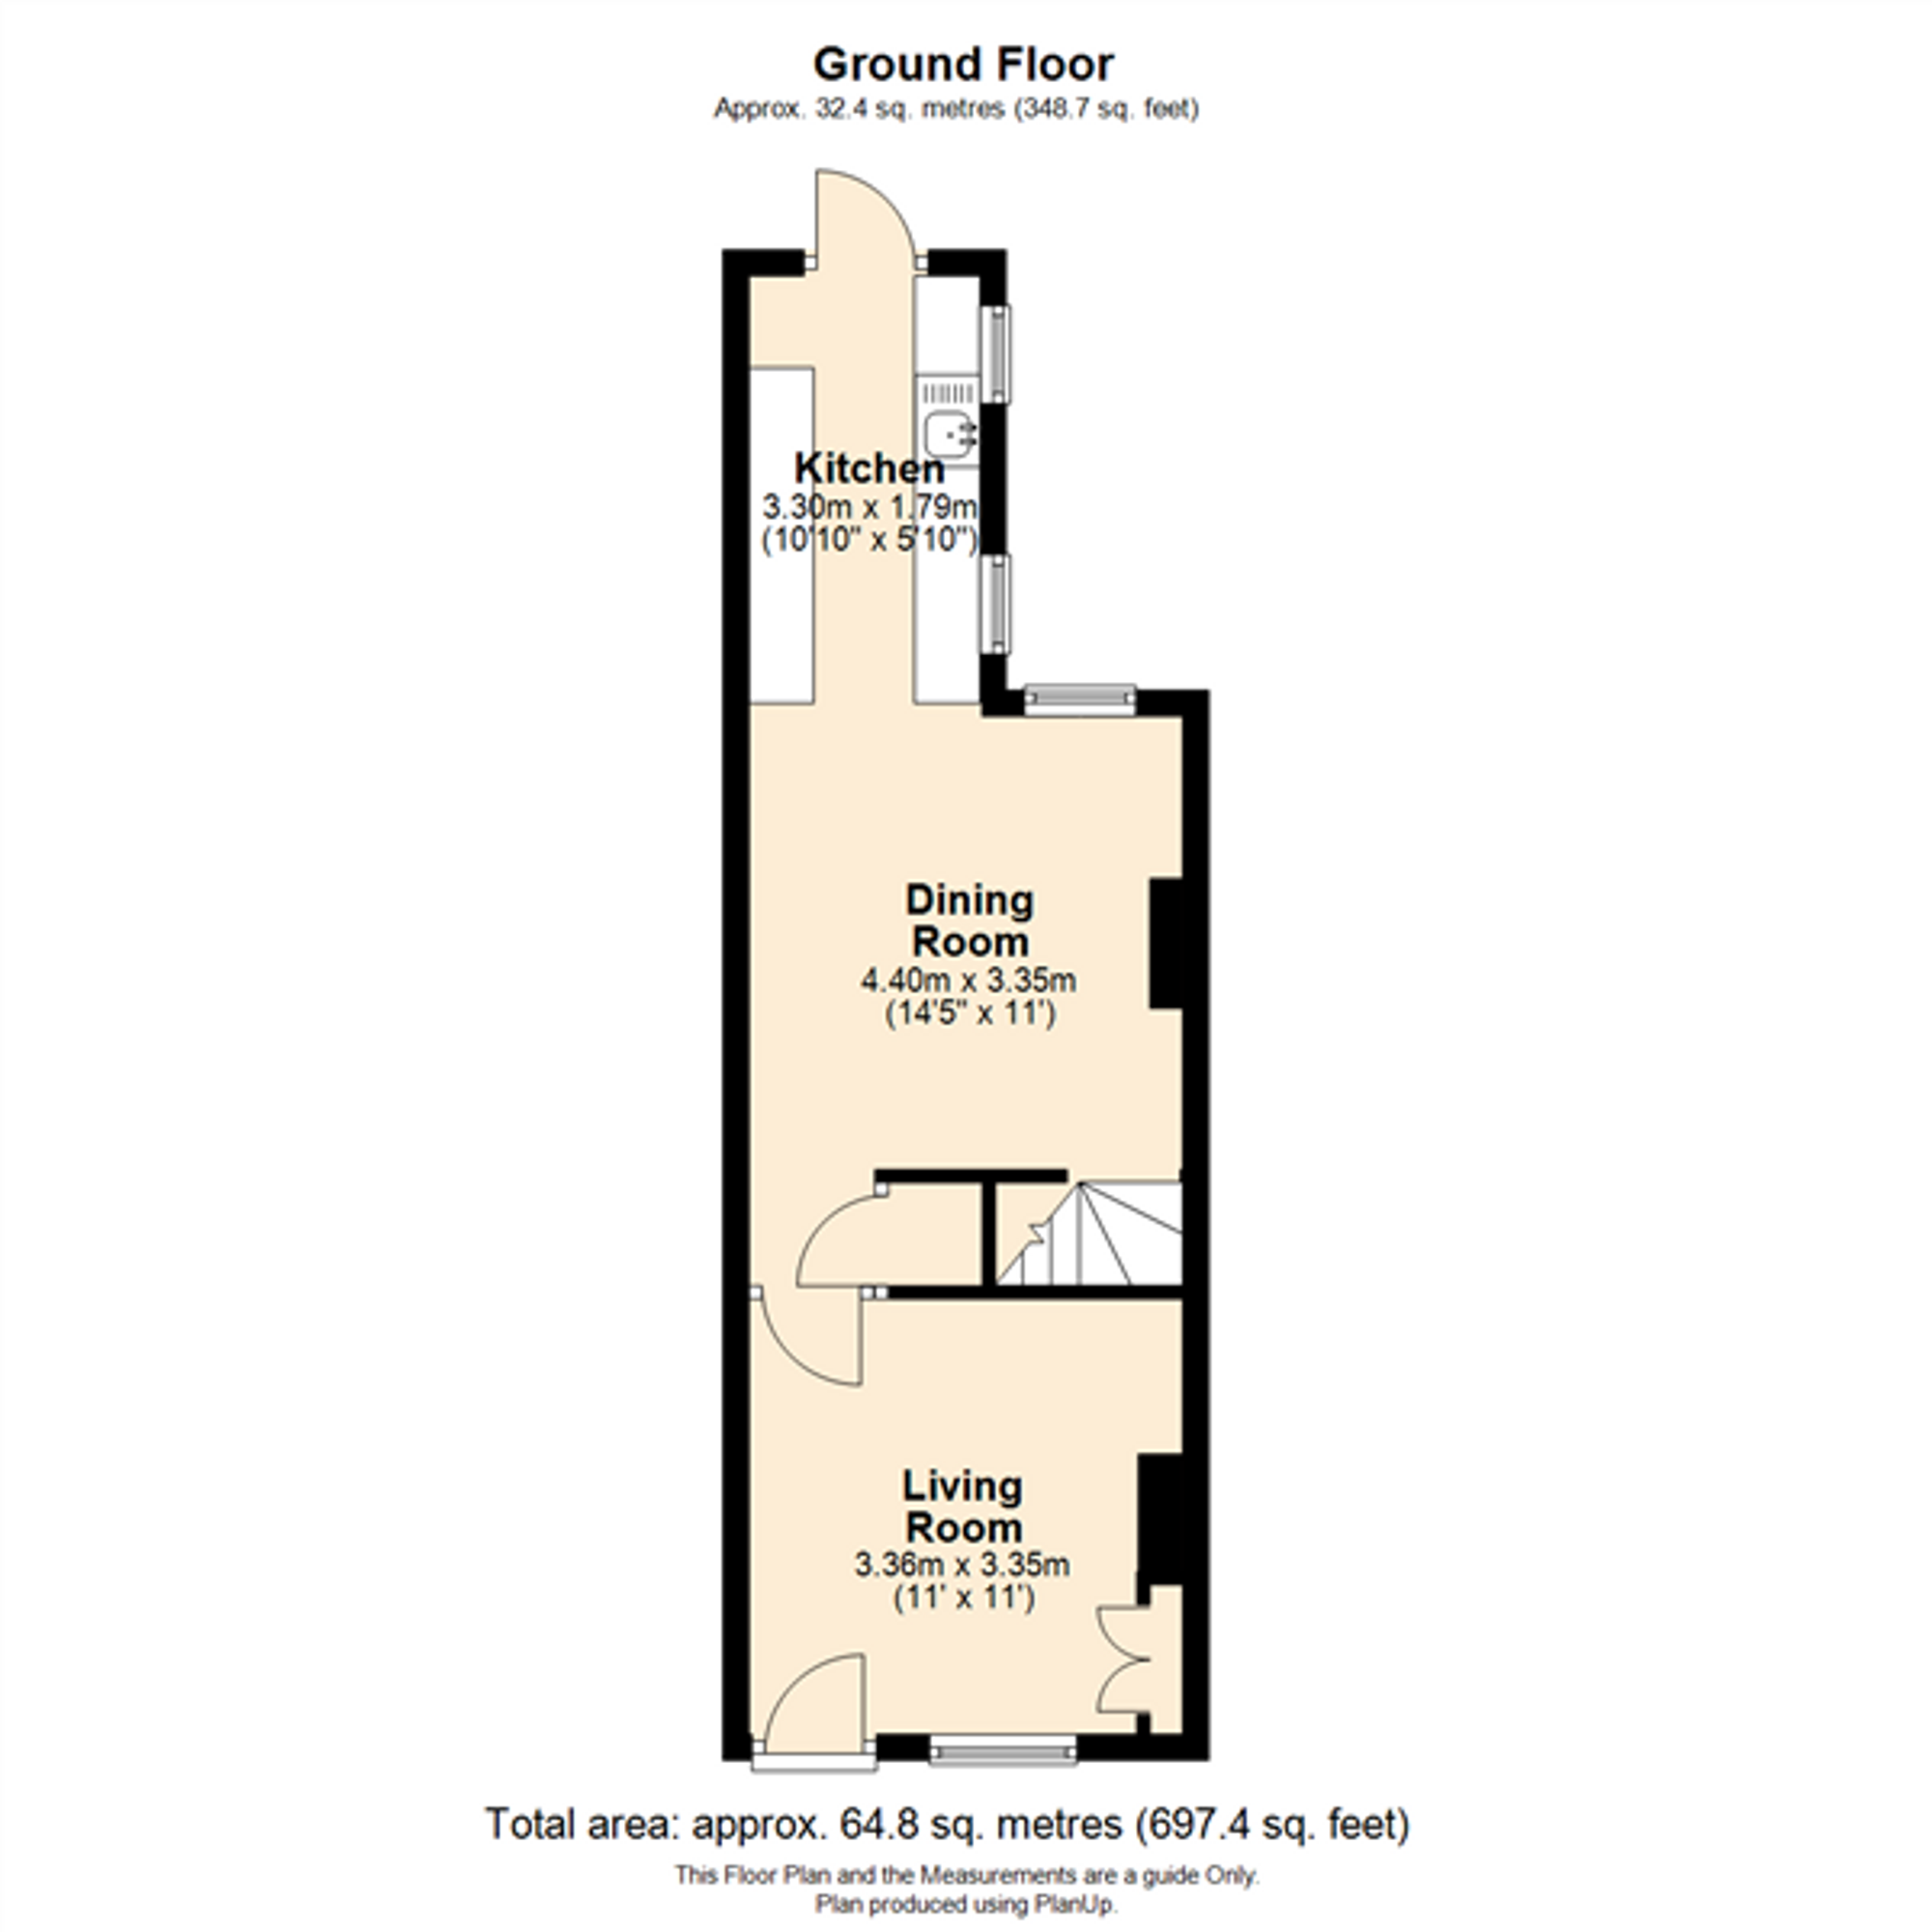 2 bed mid-terraced house for sale in Oxford Avenue, Leicester - Property floorplan